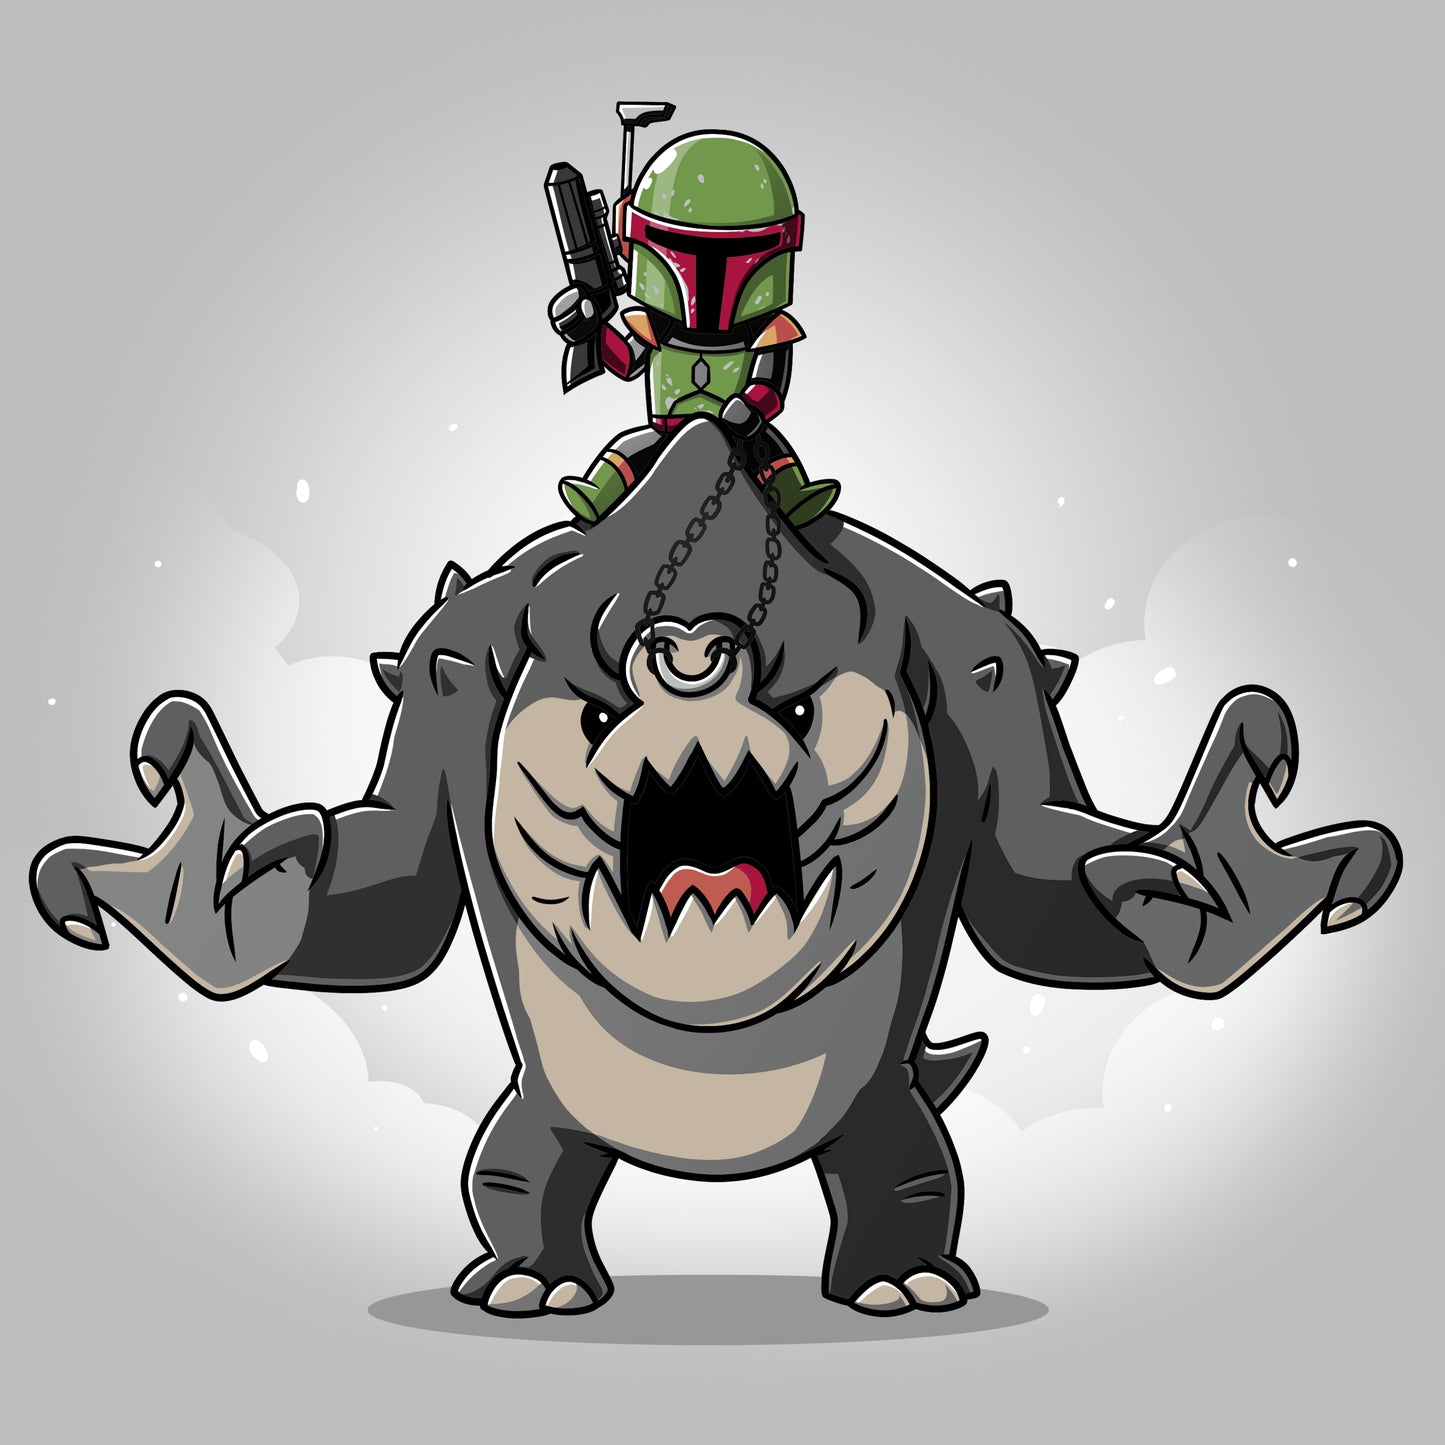 Dawn of the officially licensed Boba Fett's Rancor on the back of a monster.